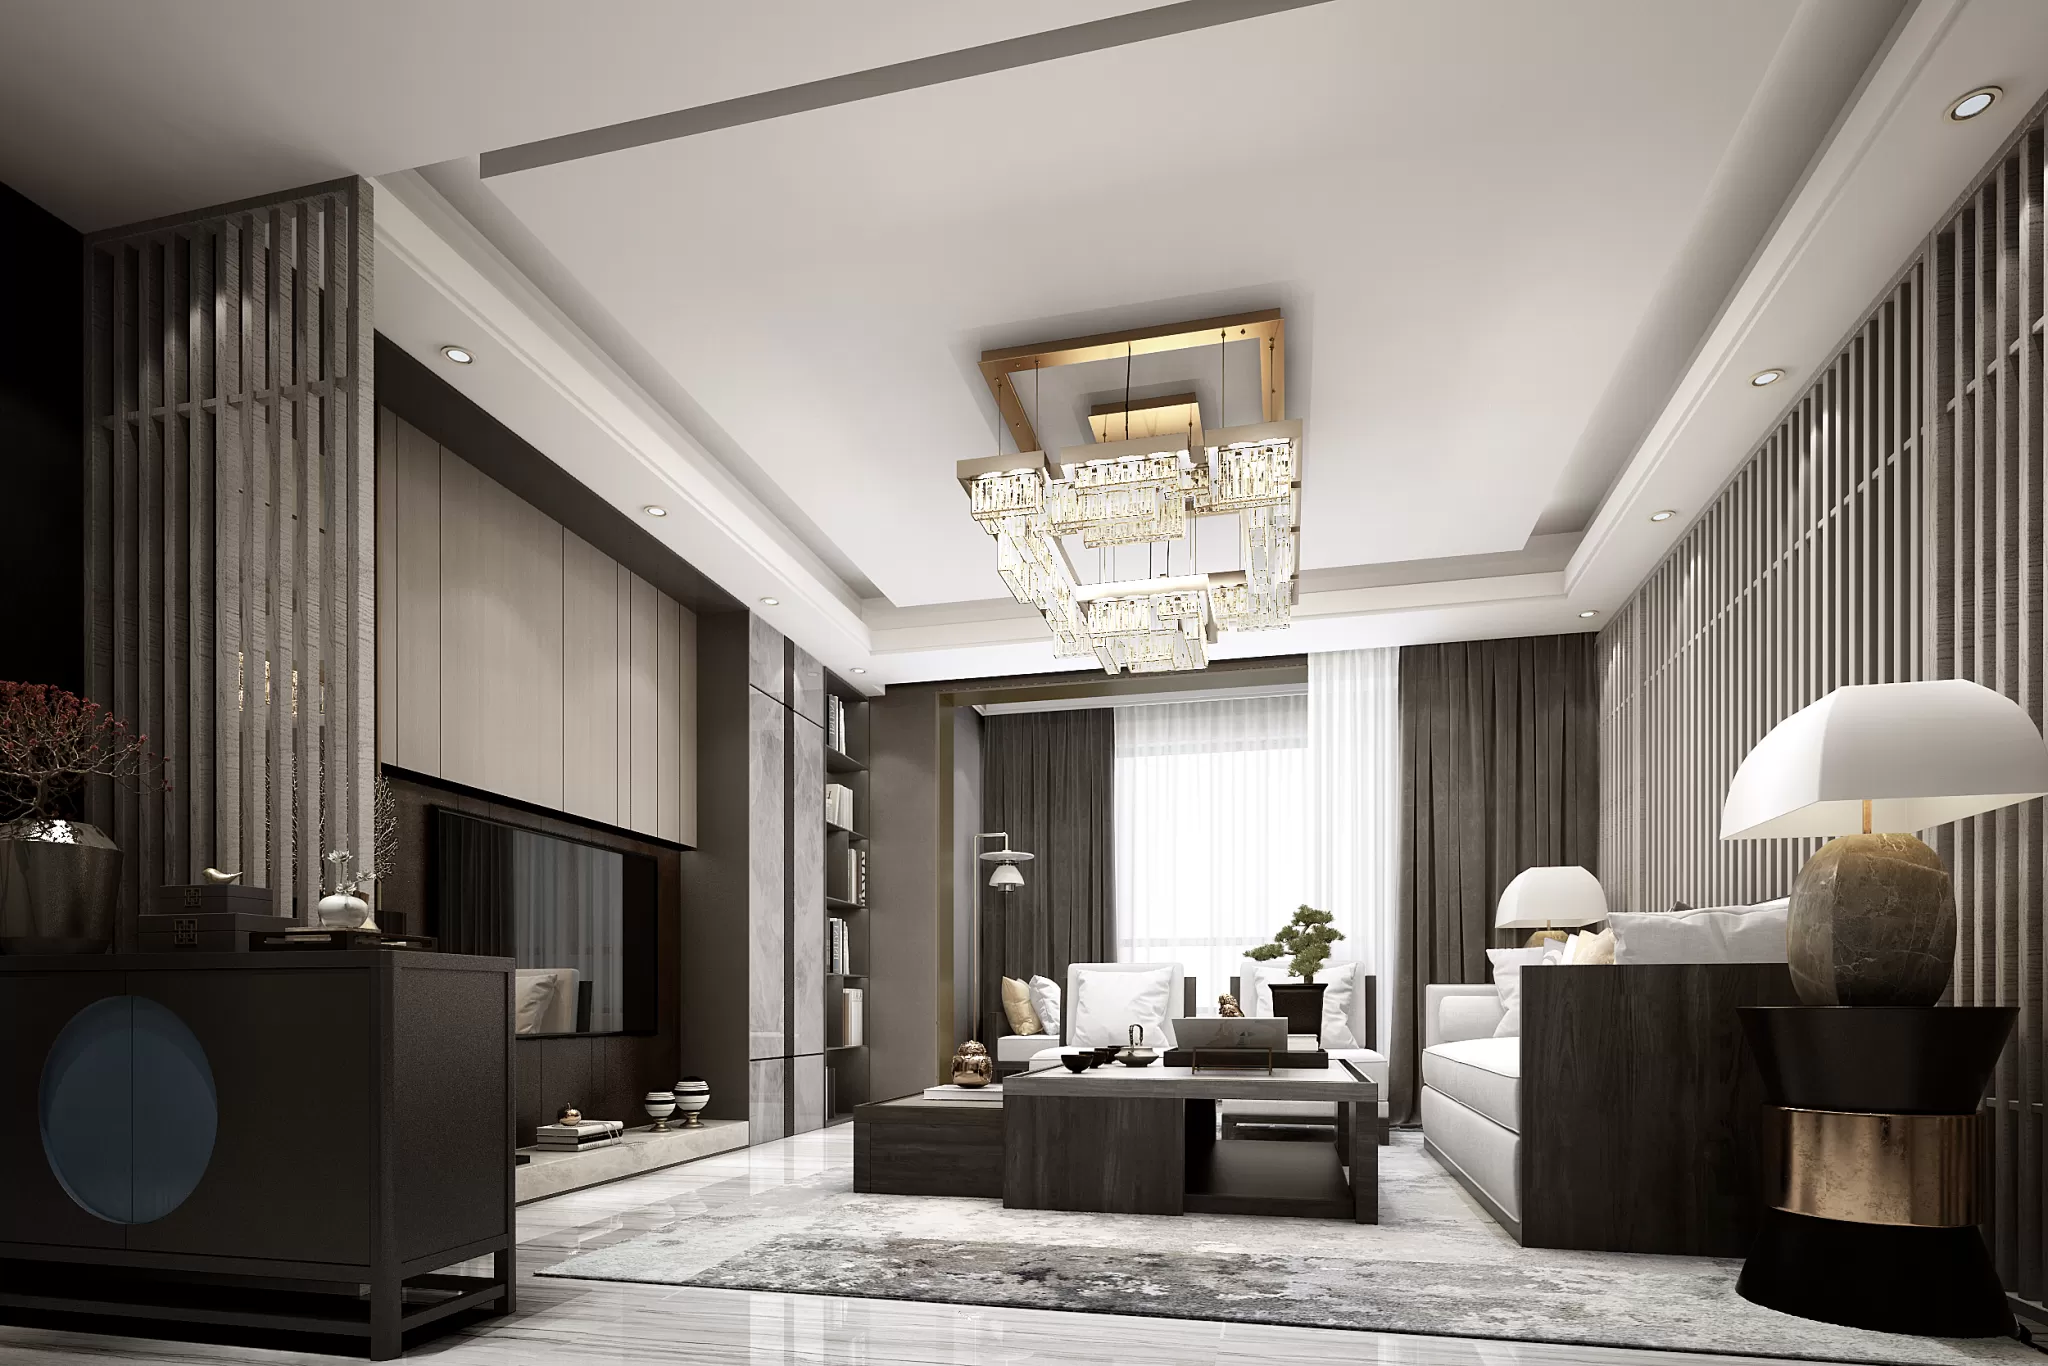 DESMOD INTERIOR 2021 (VRAY) – 4. LIVING ROOM – CHINESE – 127